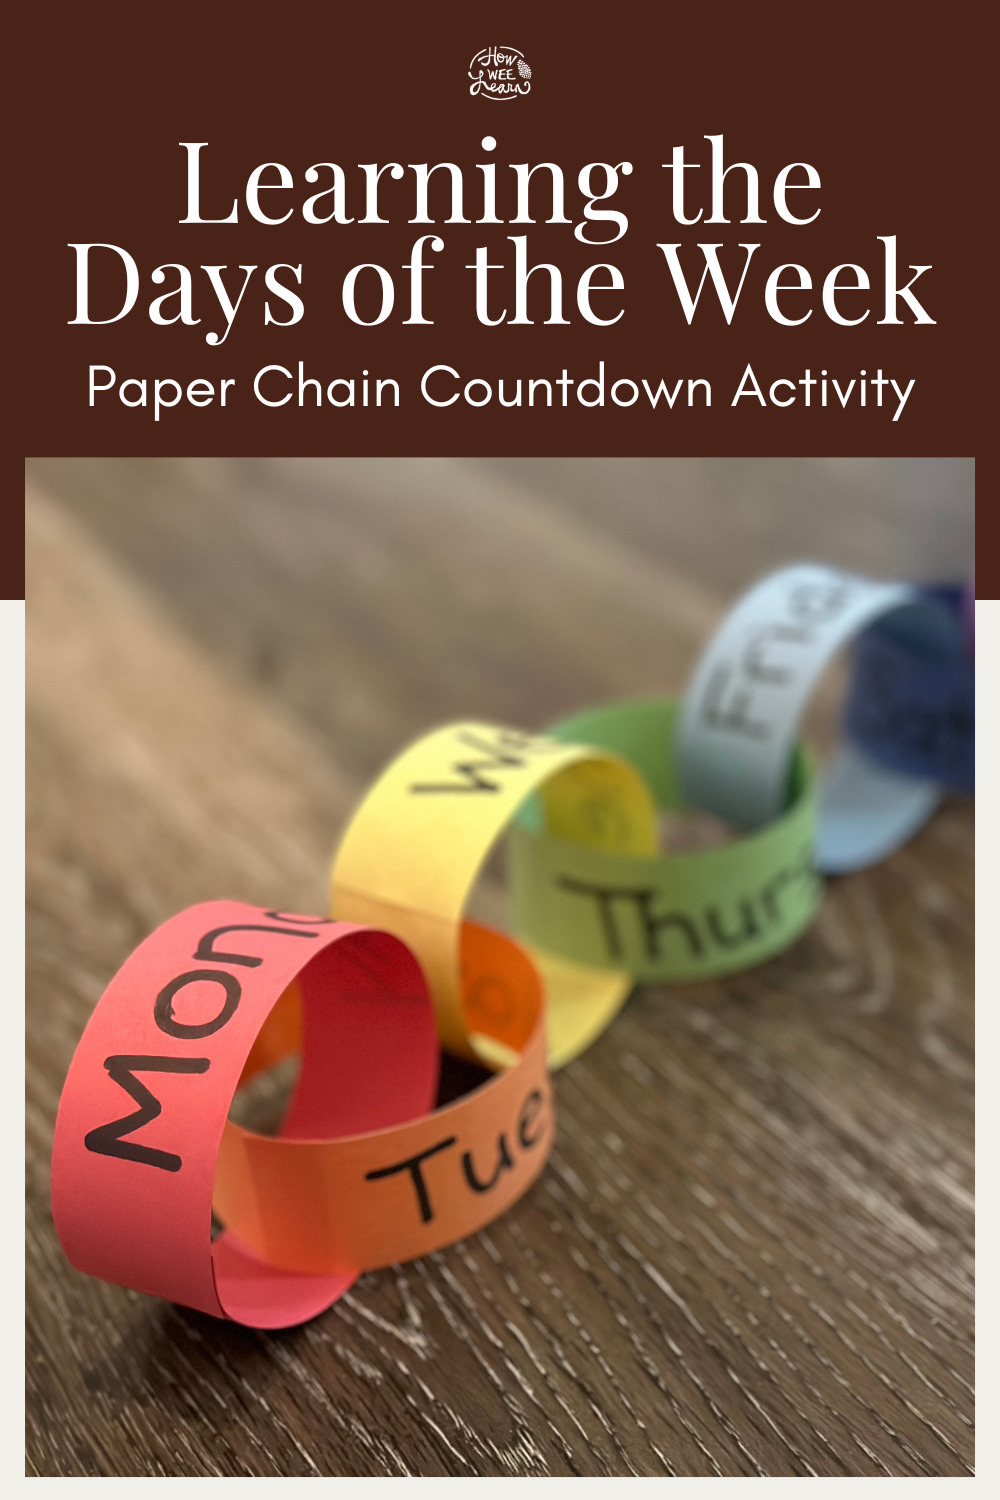 Days of the Week Paper Chain Activity for Preschoolers